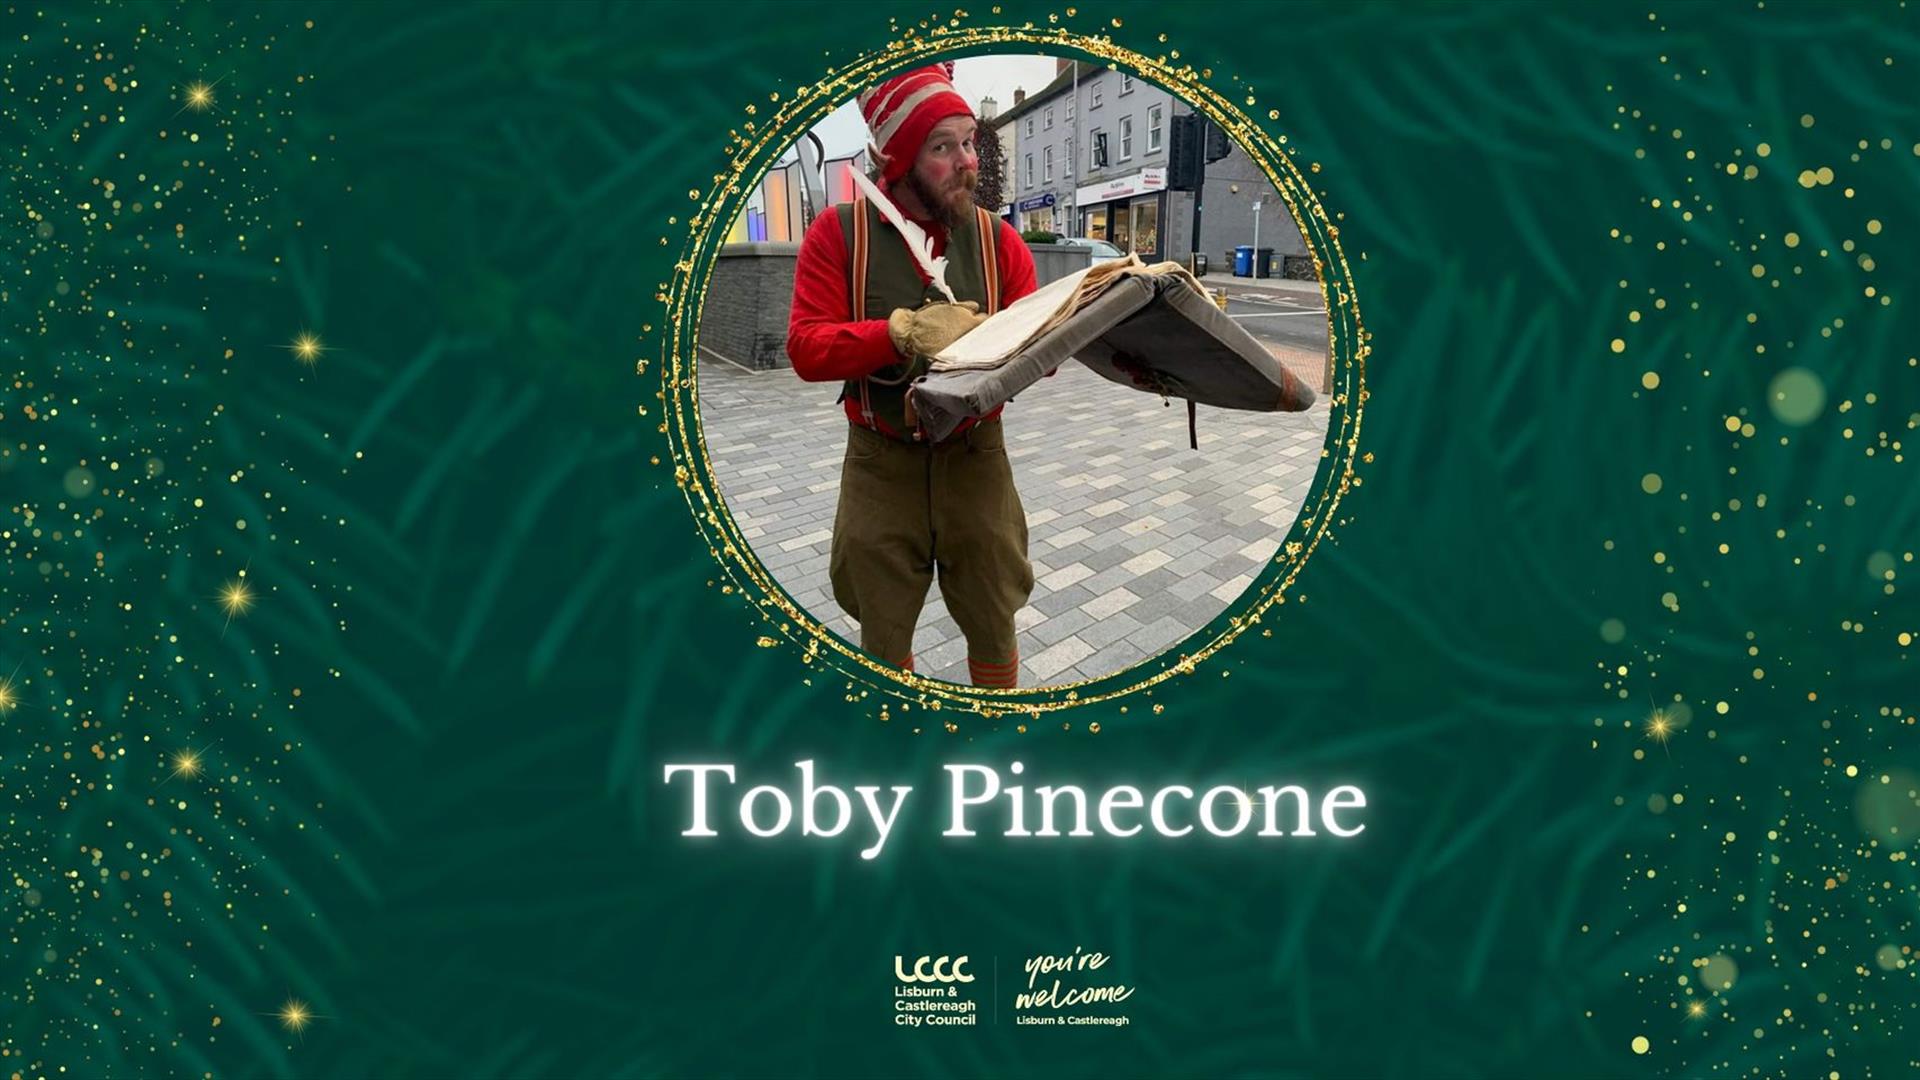 Image is of one of Santa's elves Toby Pinecone